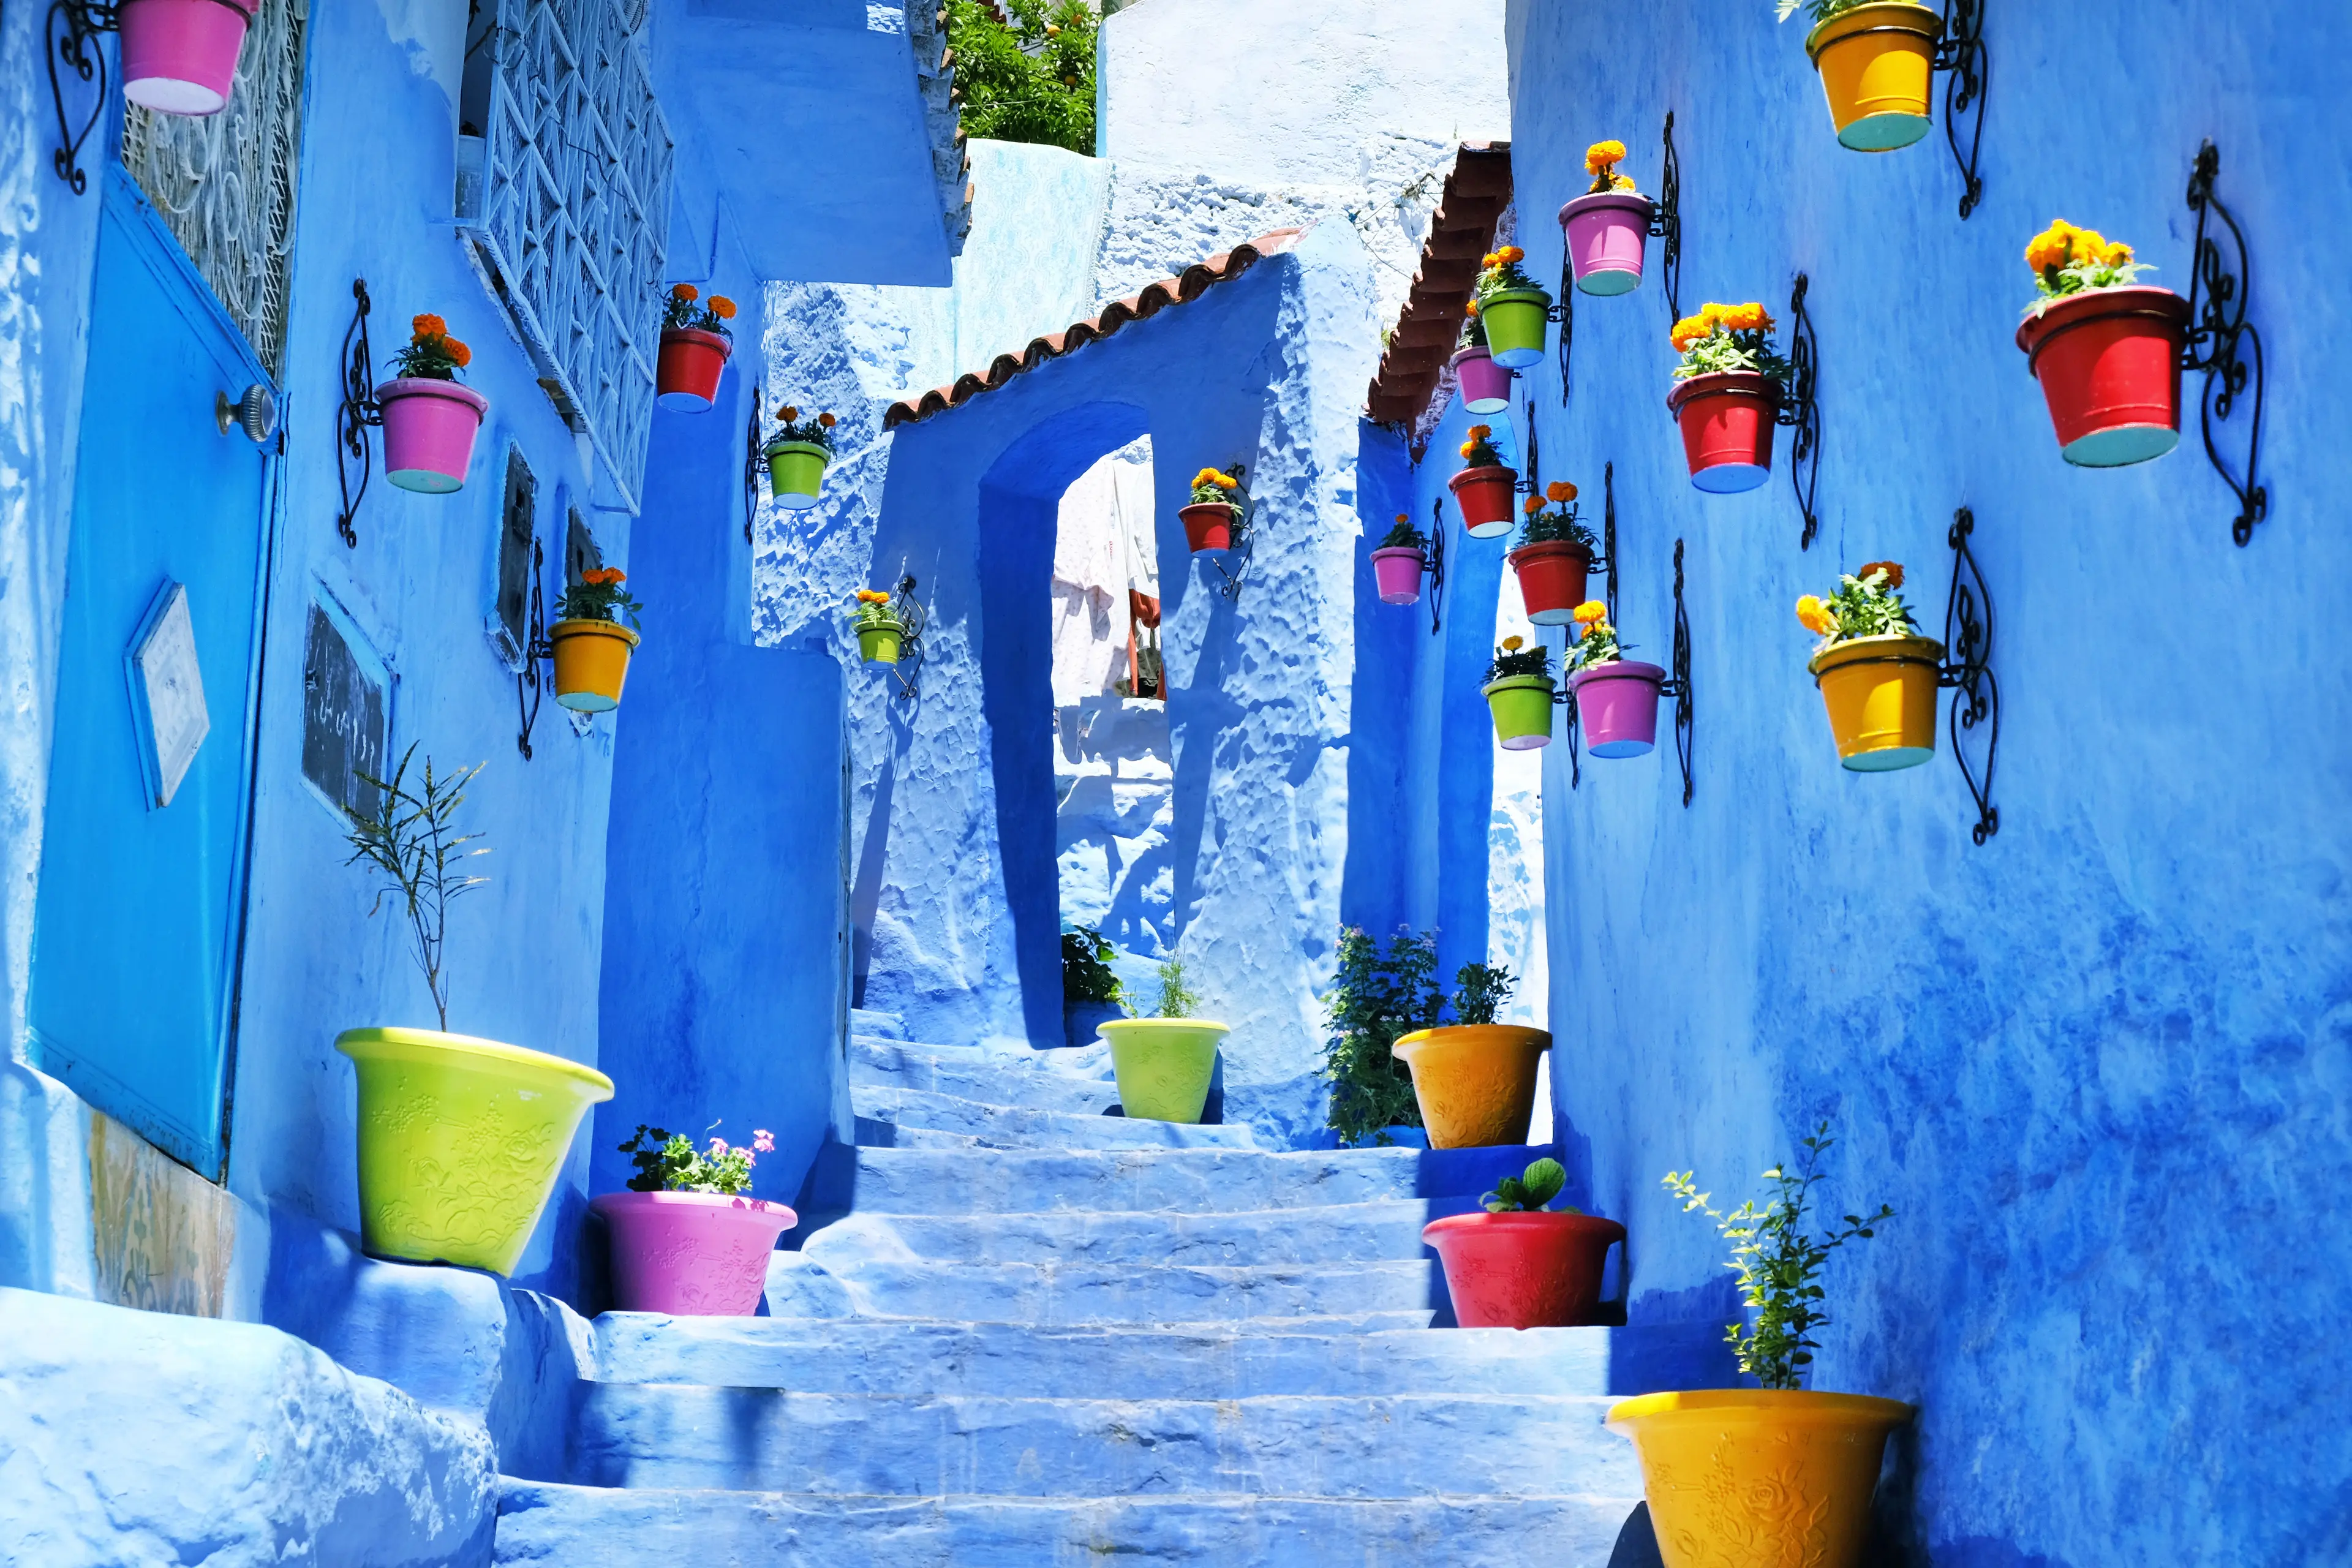 2-Day Solo Adventure: Unexplored Chefchaouen for Outdoor Enthusiasts